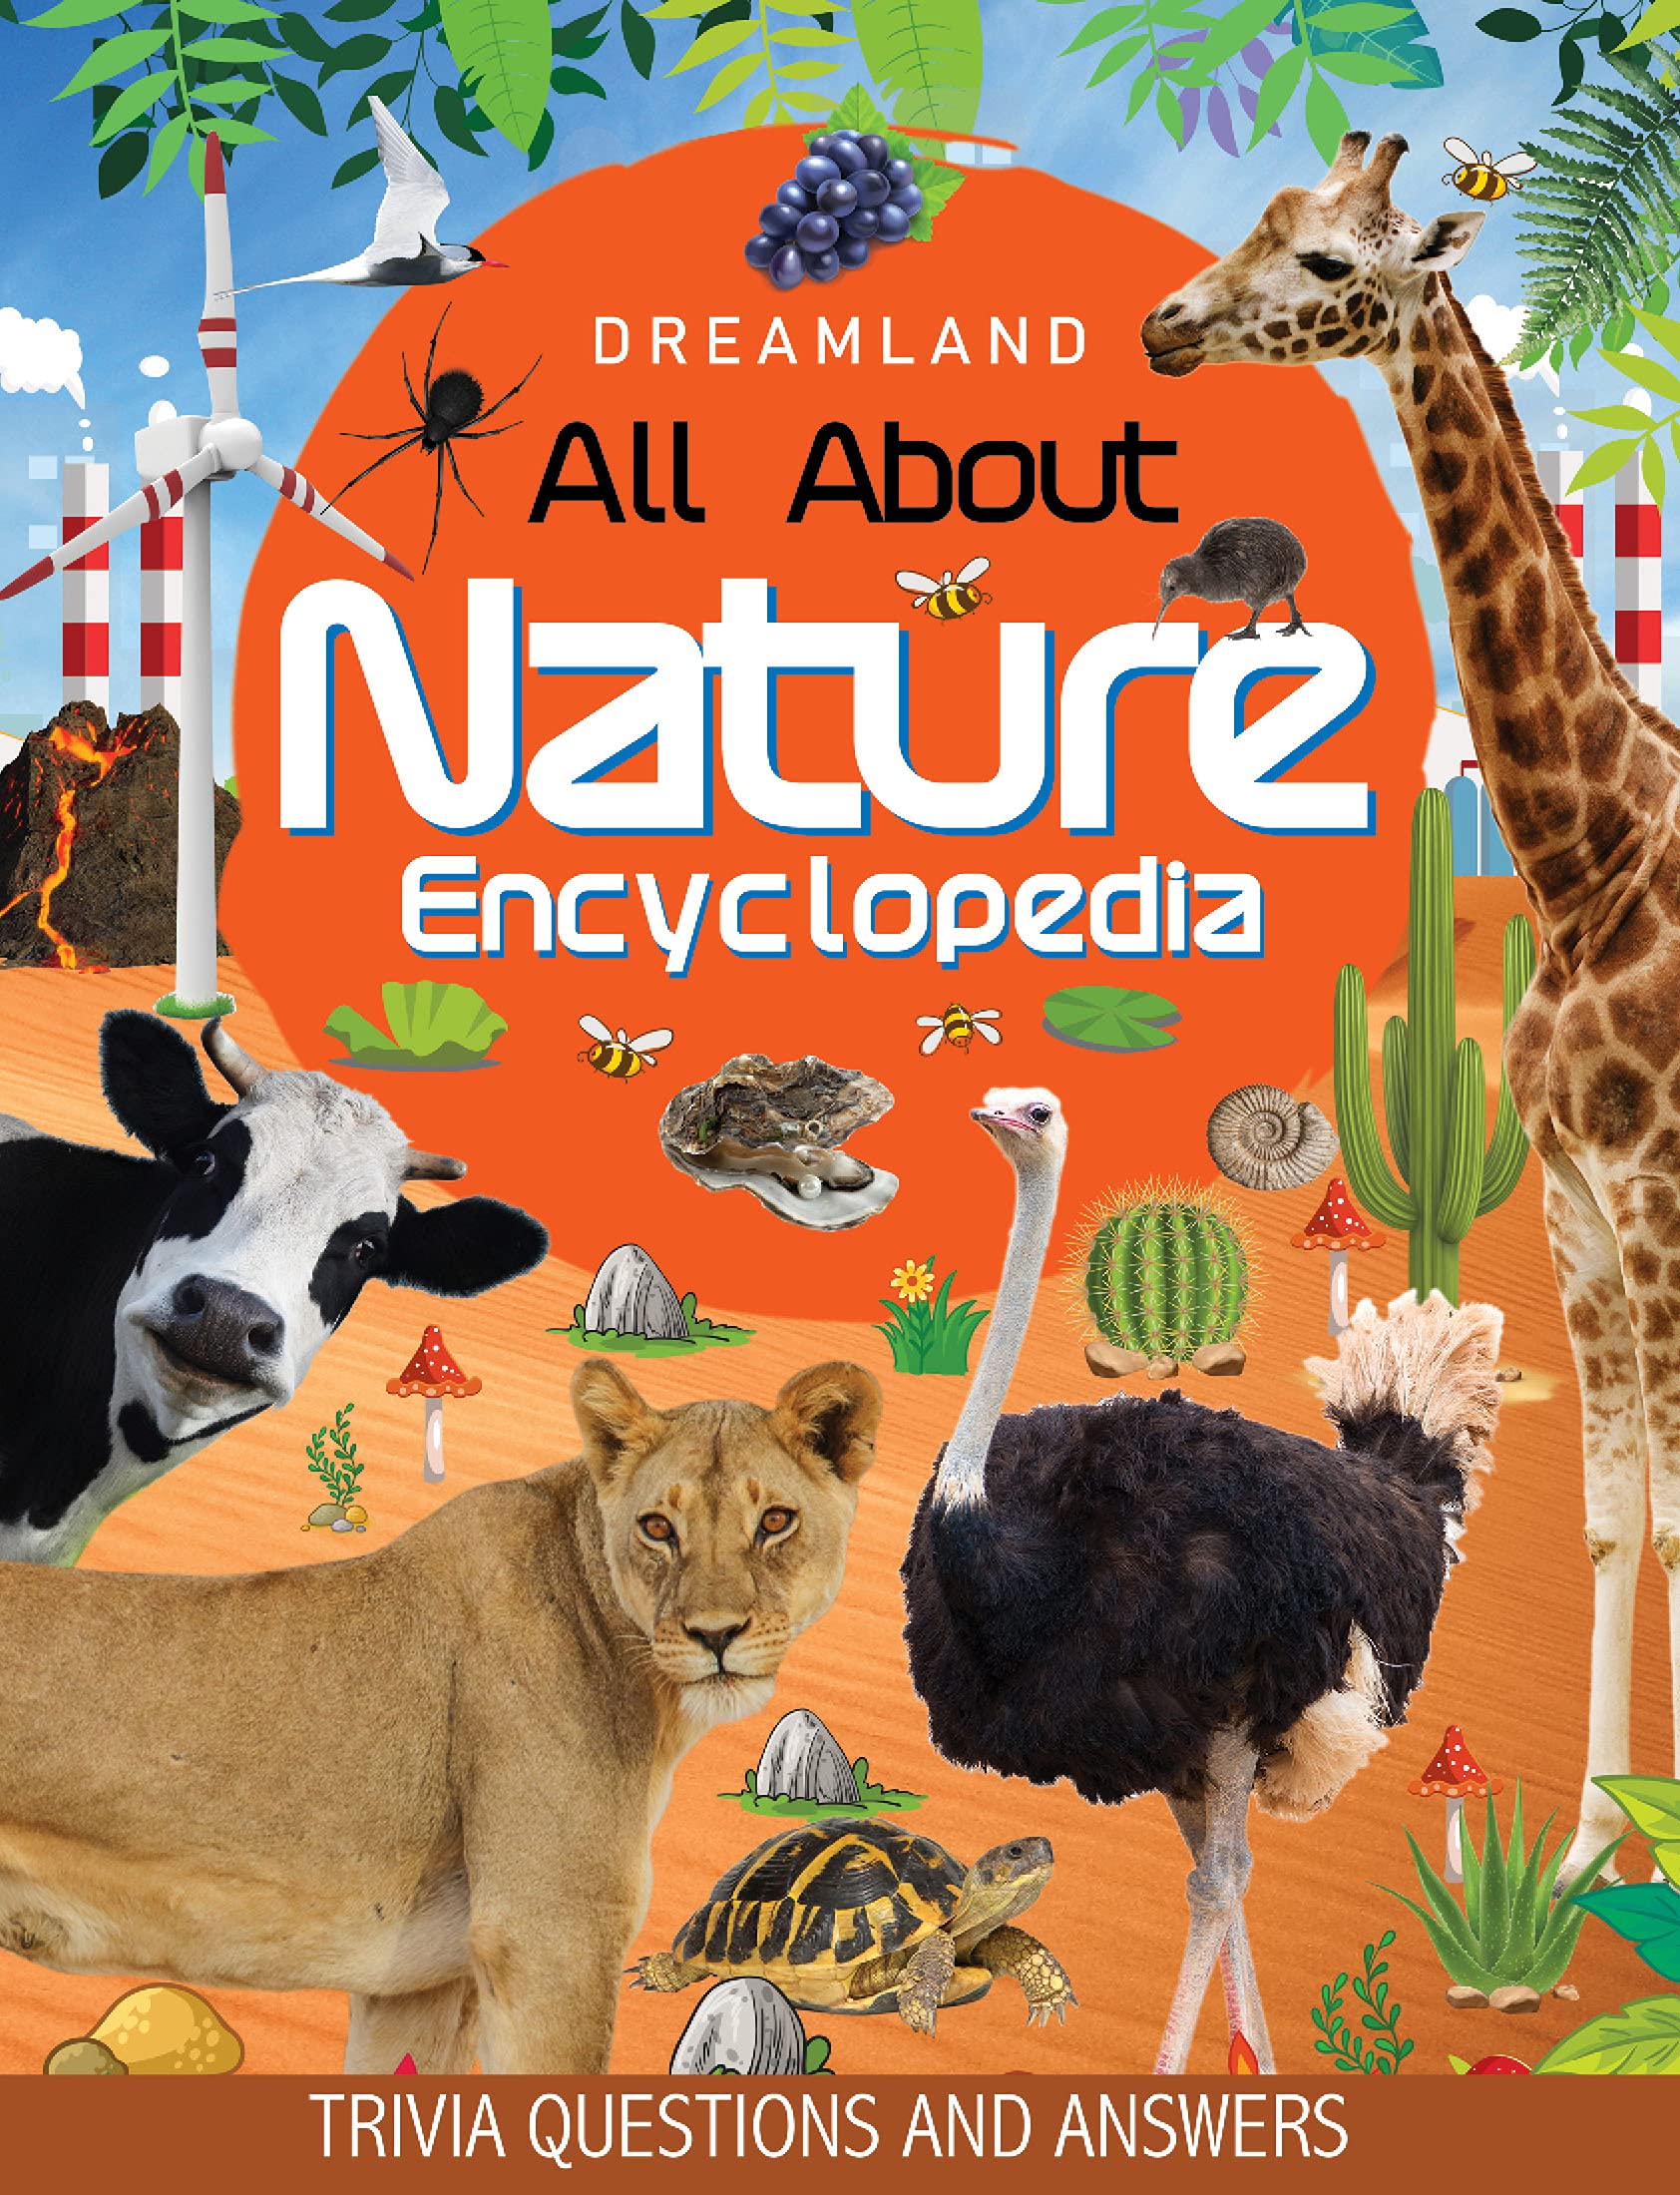 Nature Encyclopedia for Children | All About Trivia Questions and Answers Paperback